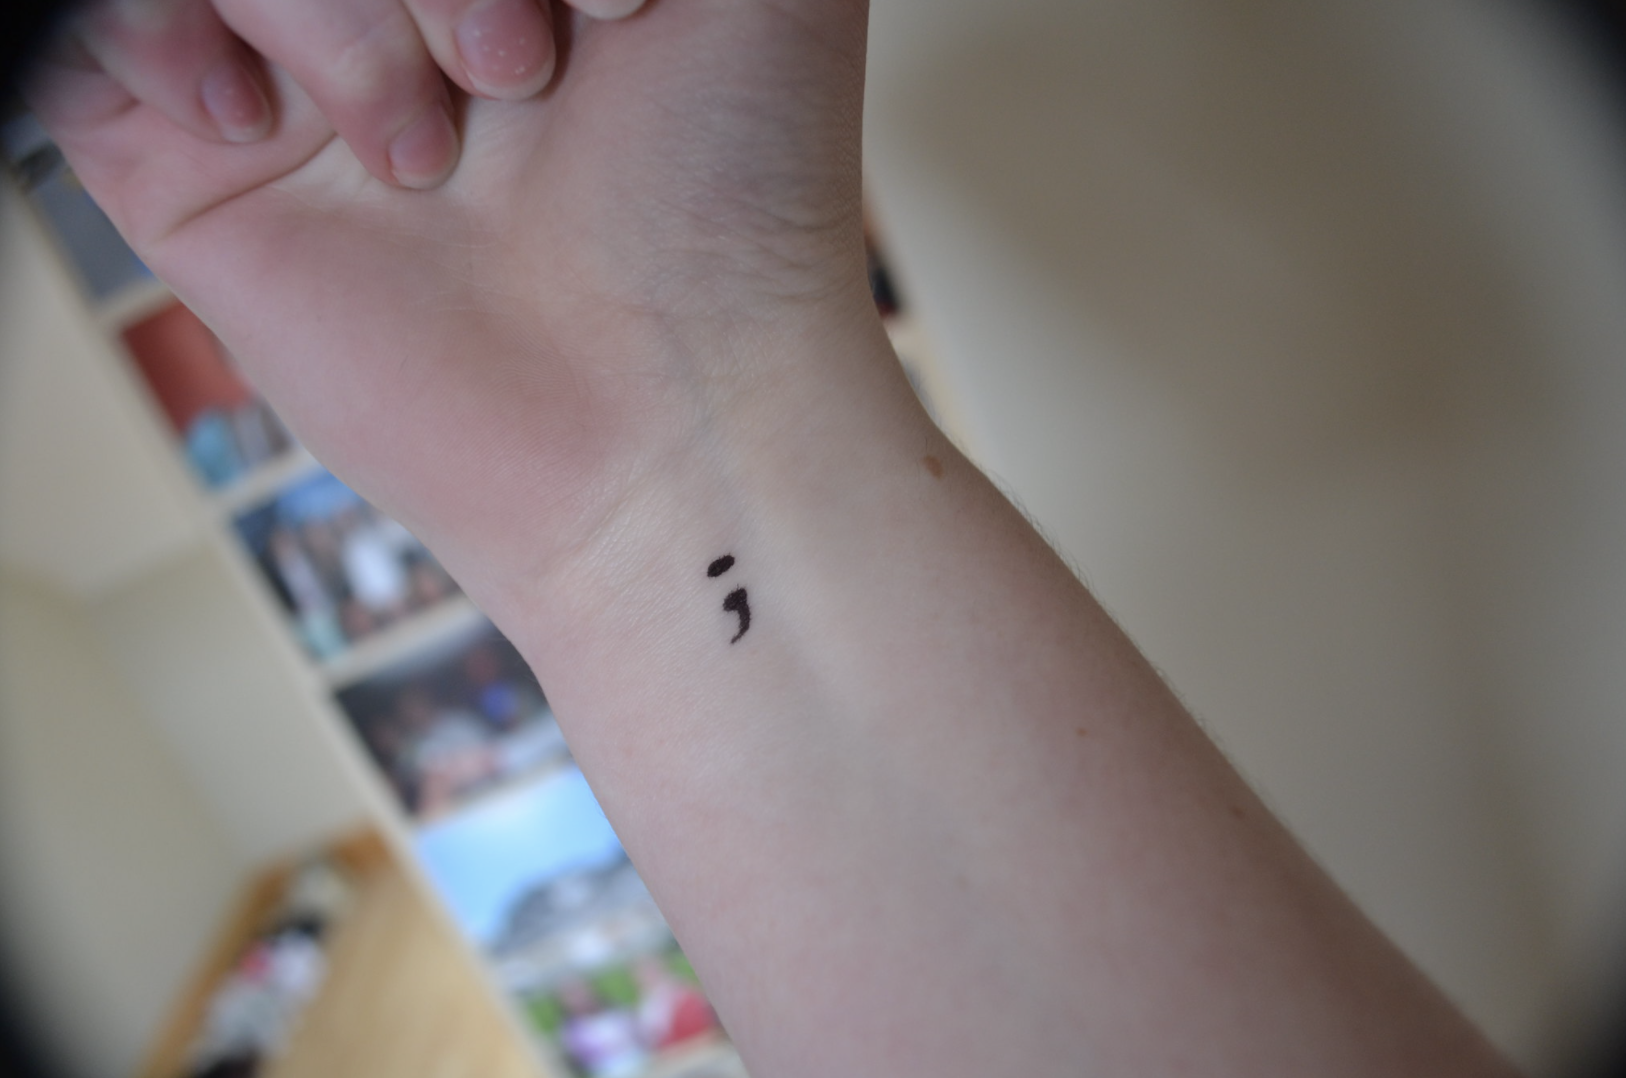 5 Questions to Assess Suicide Risk  1 about a Project Semicolon Tattoo   elephant journal